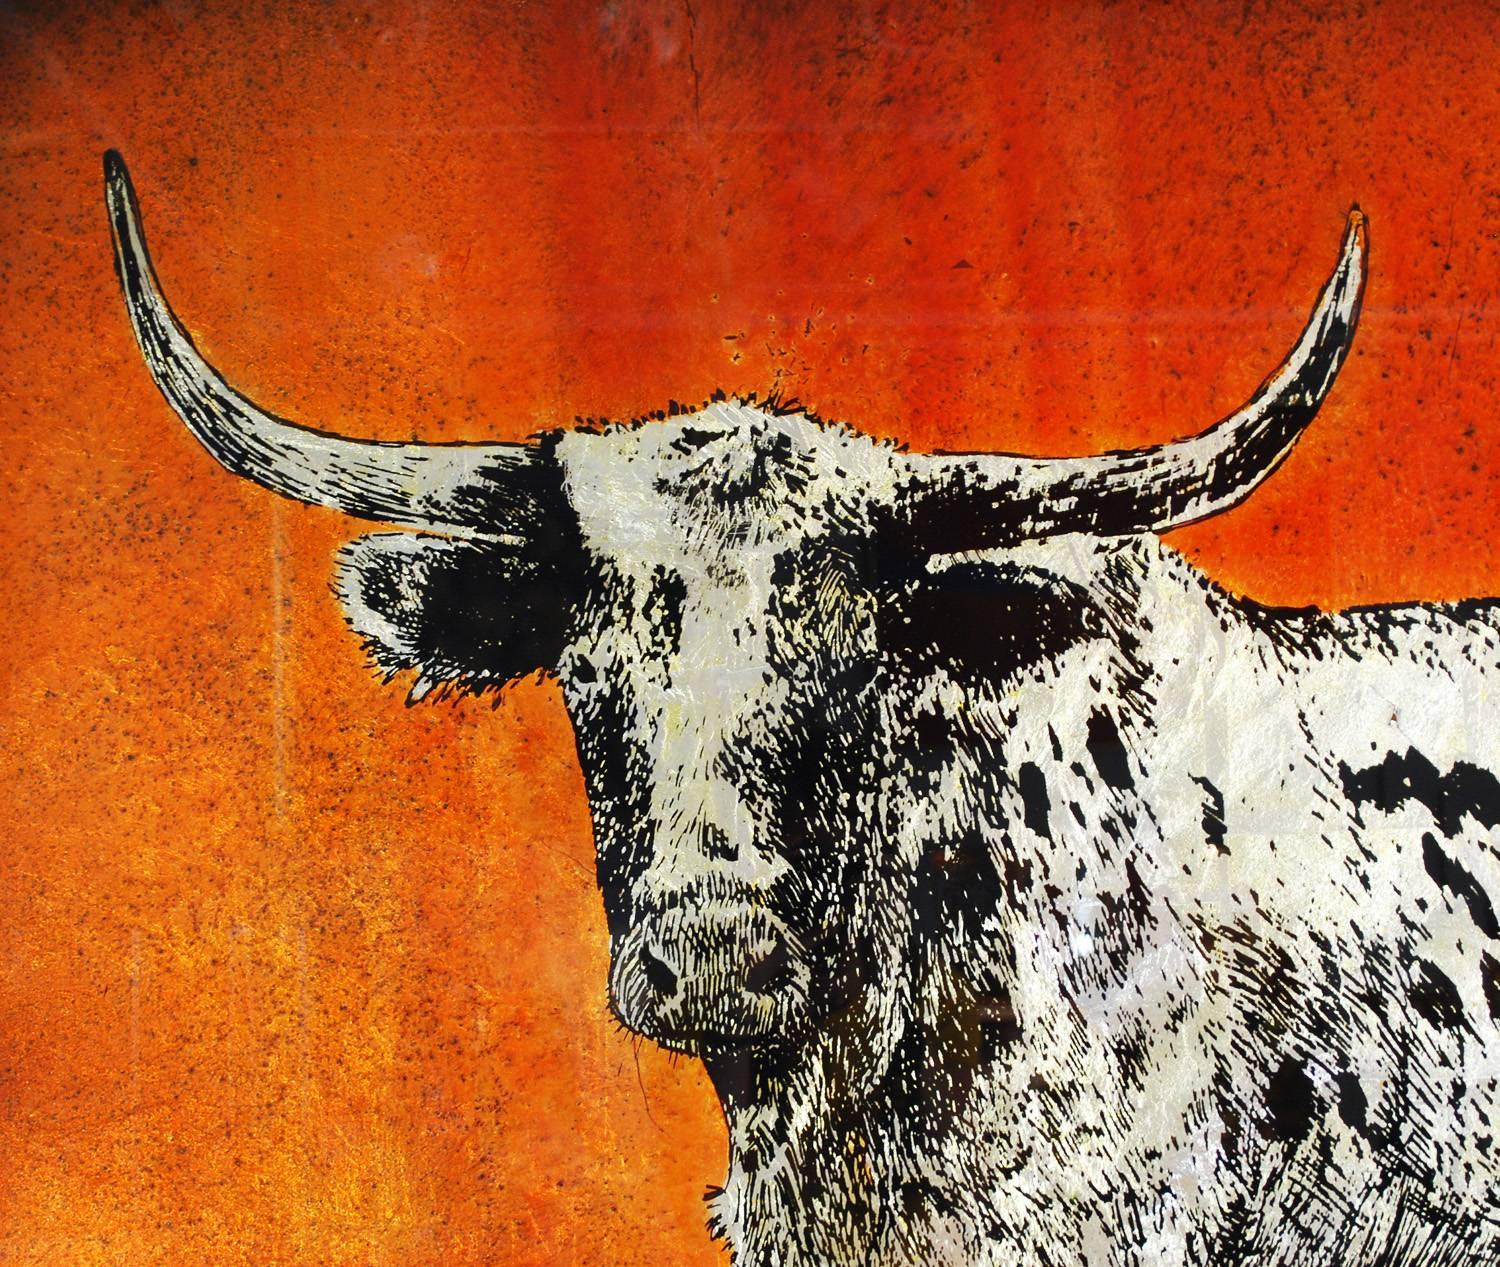 Magnificent and rare silver leaf and reverse glass painting of a longhorn by respected artist Jack White. The glass is back painted in black with silver leaf is affixed on the back. This process creates phenomenal glow, color and texture throughout